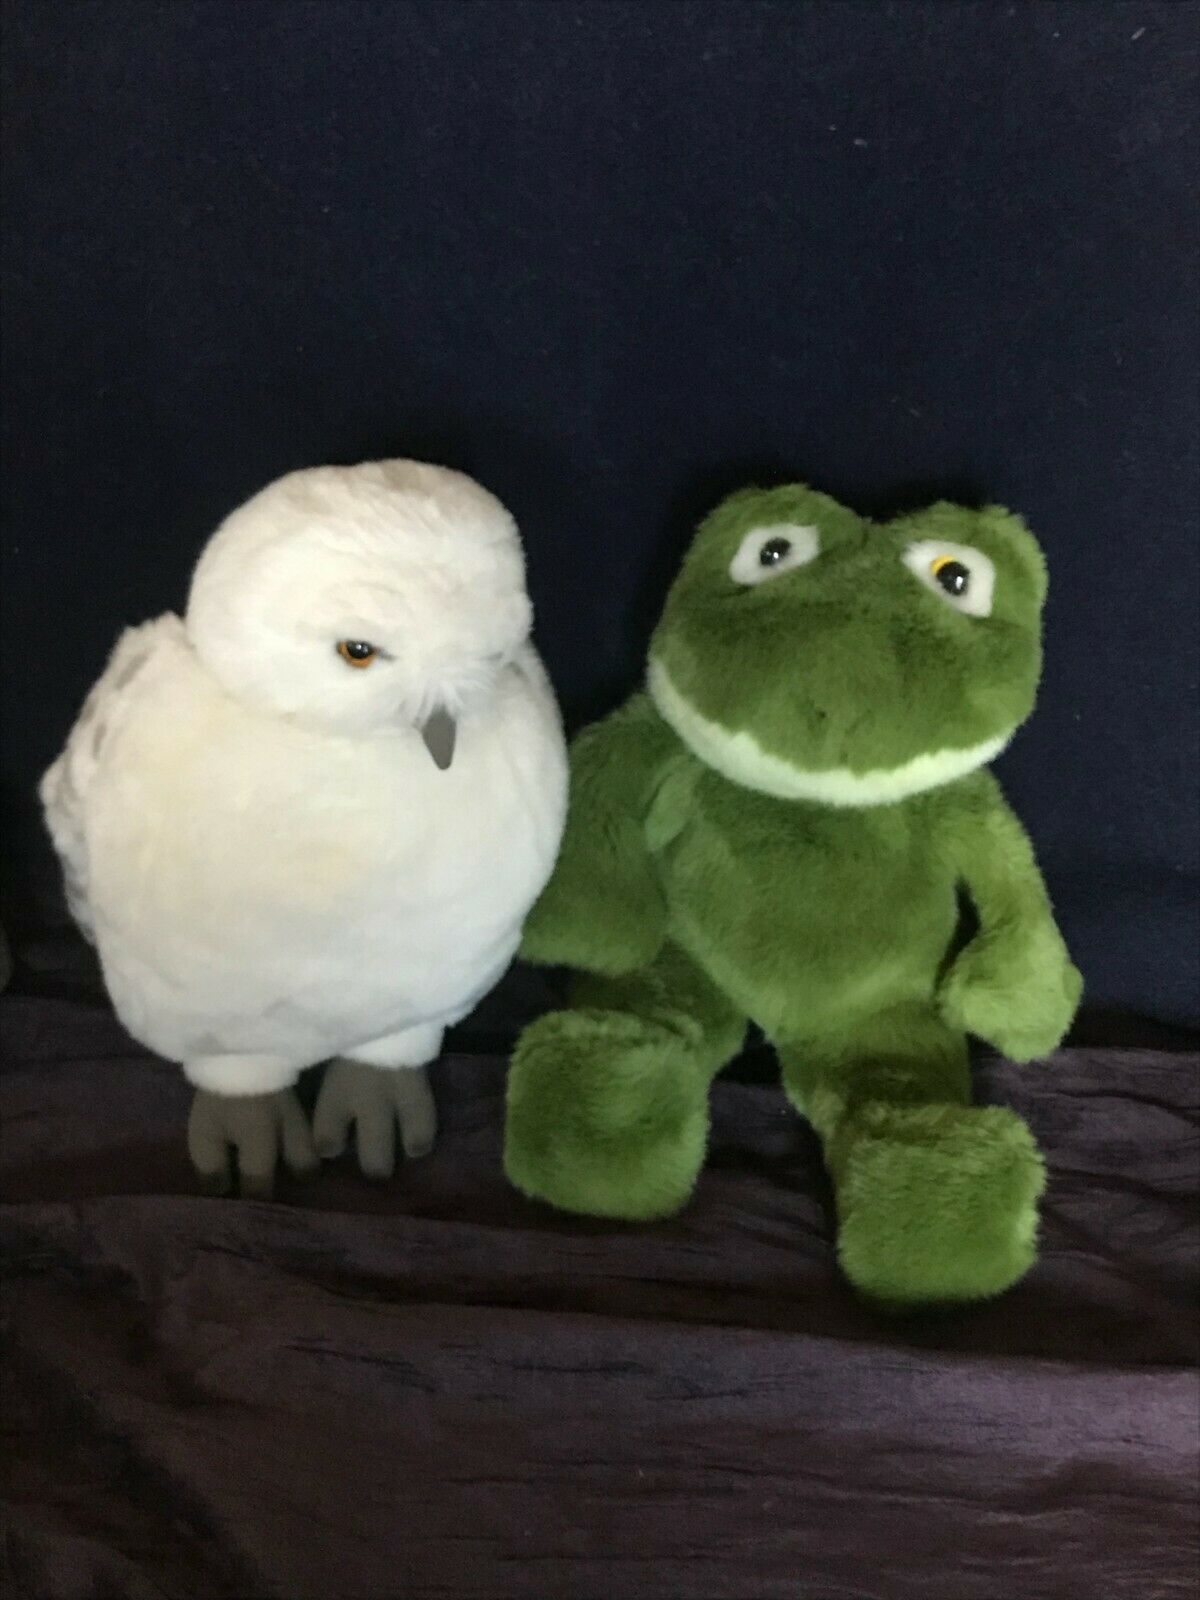 Lot of Plush Fluffyville Green Frog & Harry Pottery Snowy White Owl w Turning He - $19.39